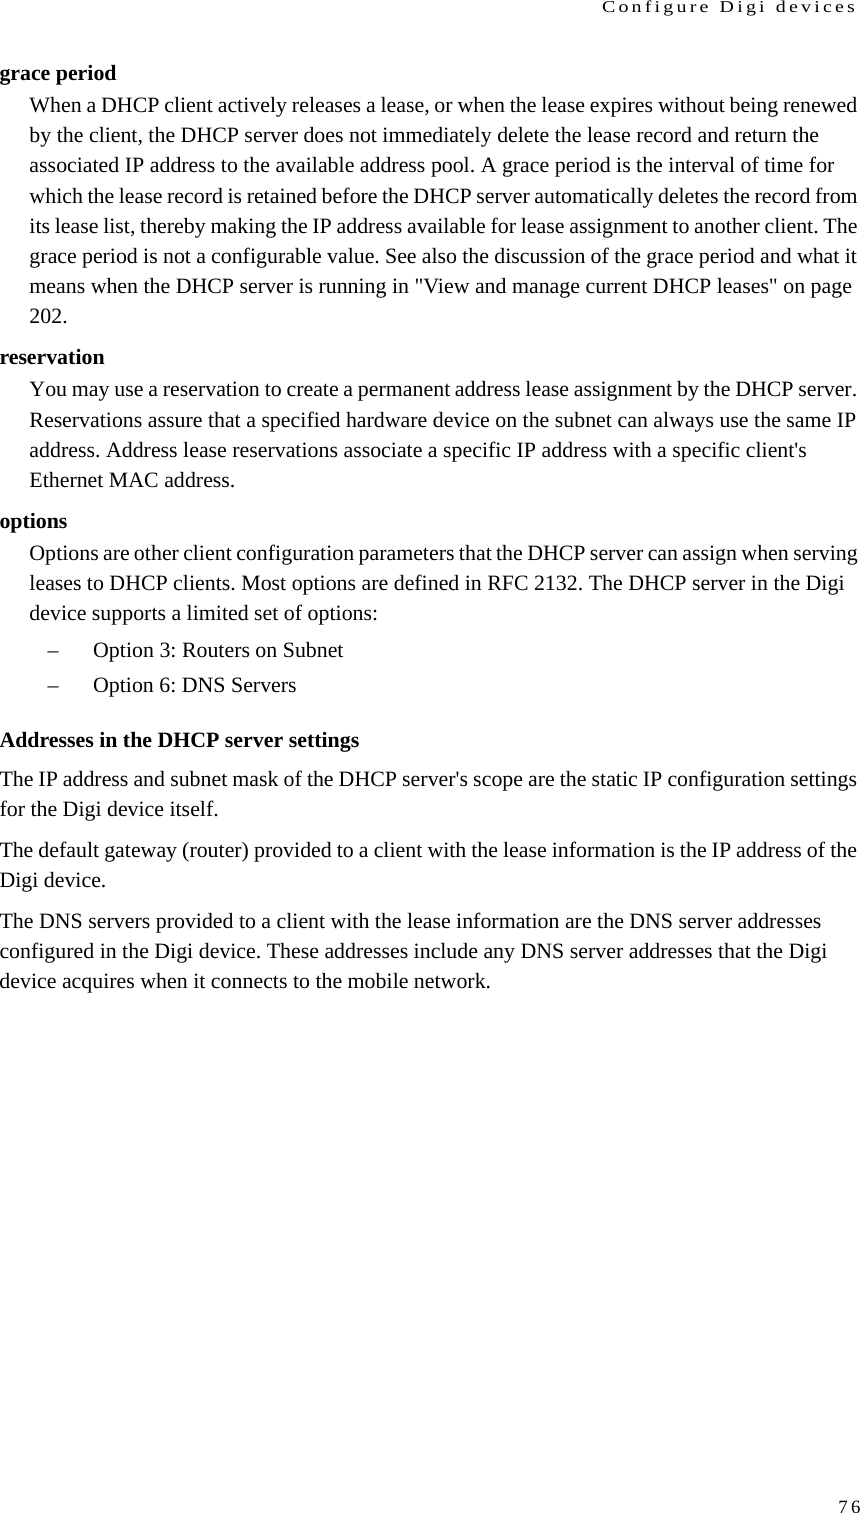 Configure Digi devices76grace periodWhen a DHCP client actively releases a lease, or when the lease expires without being renewed by the client, the DHCP server does not immediately delete the lease record and return the associated IP address to the available address pool. A grace period is the interval of time for which the lease record is retained before the DHCP server automatically deletes the record from its lease list, thereby making the IP address available for lease assignment to another client. The grace period is not a configurable value. See also the discussion of the grace period and what it means when the DHCP server is running in &quot;View and manage current DHCP leases&quot; on page 202. reservationYou may use a reservation to create a permanent address lease assignment by the DHCP server. Reservations assure that a specified hardware device on the subnet can always use the same IP address. Address lease reservations associate a specific IP address with a specific client&apos;s Ethernet MAC address. optionsOptions are other client configuration parameters that the DHCP server can assign when serving leases to DHCP clients. Most options are defined in RFC 2132. The DHCP server in the Digi device supports a limited set of options: – Option 3: Routers on Subnet – Option 6: DNS Servers Addresses in the DHCP server settingsThe IP address and subnet mask of the DHCP server&apos;s scope are the static IP configuration settings for the Digi device itself. The default gateway (router) provided to a client with the lease information is the IP address of the Digi device. The DNS servers provided to a client with the lease information are the DNS server addresses configured in the Digi device. These addresses include any DNS server addresses that the Digi device acquires when it connects to the mobile network. 